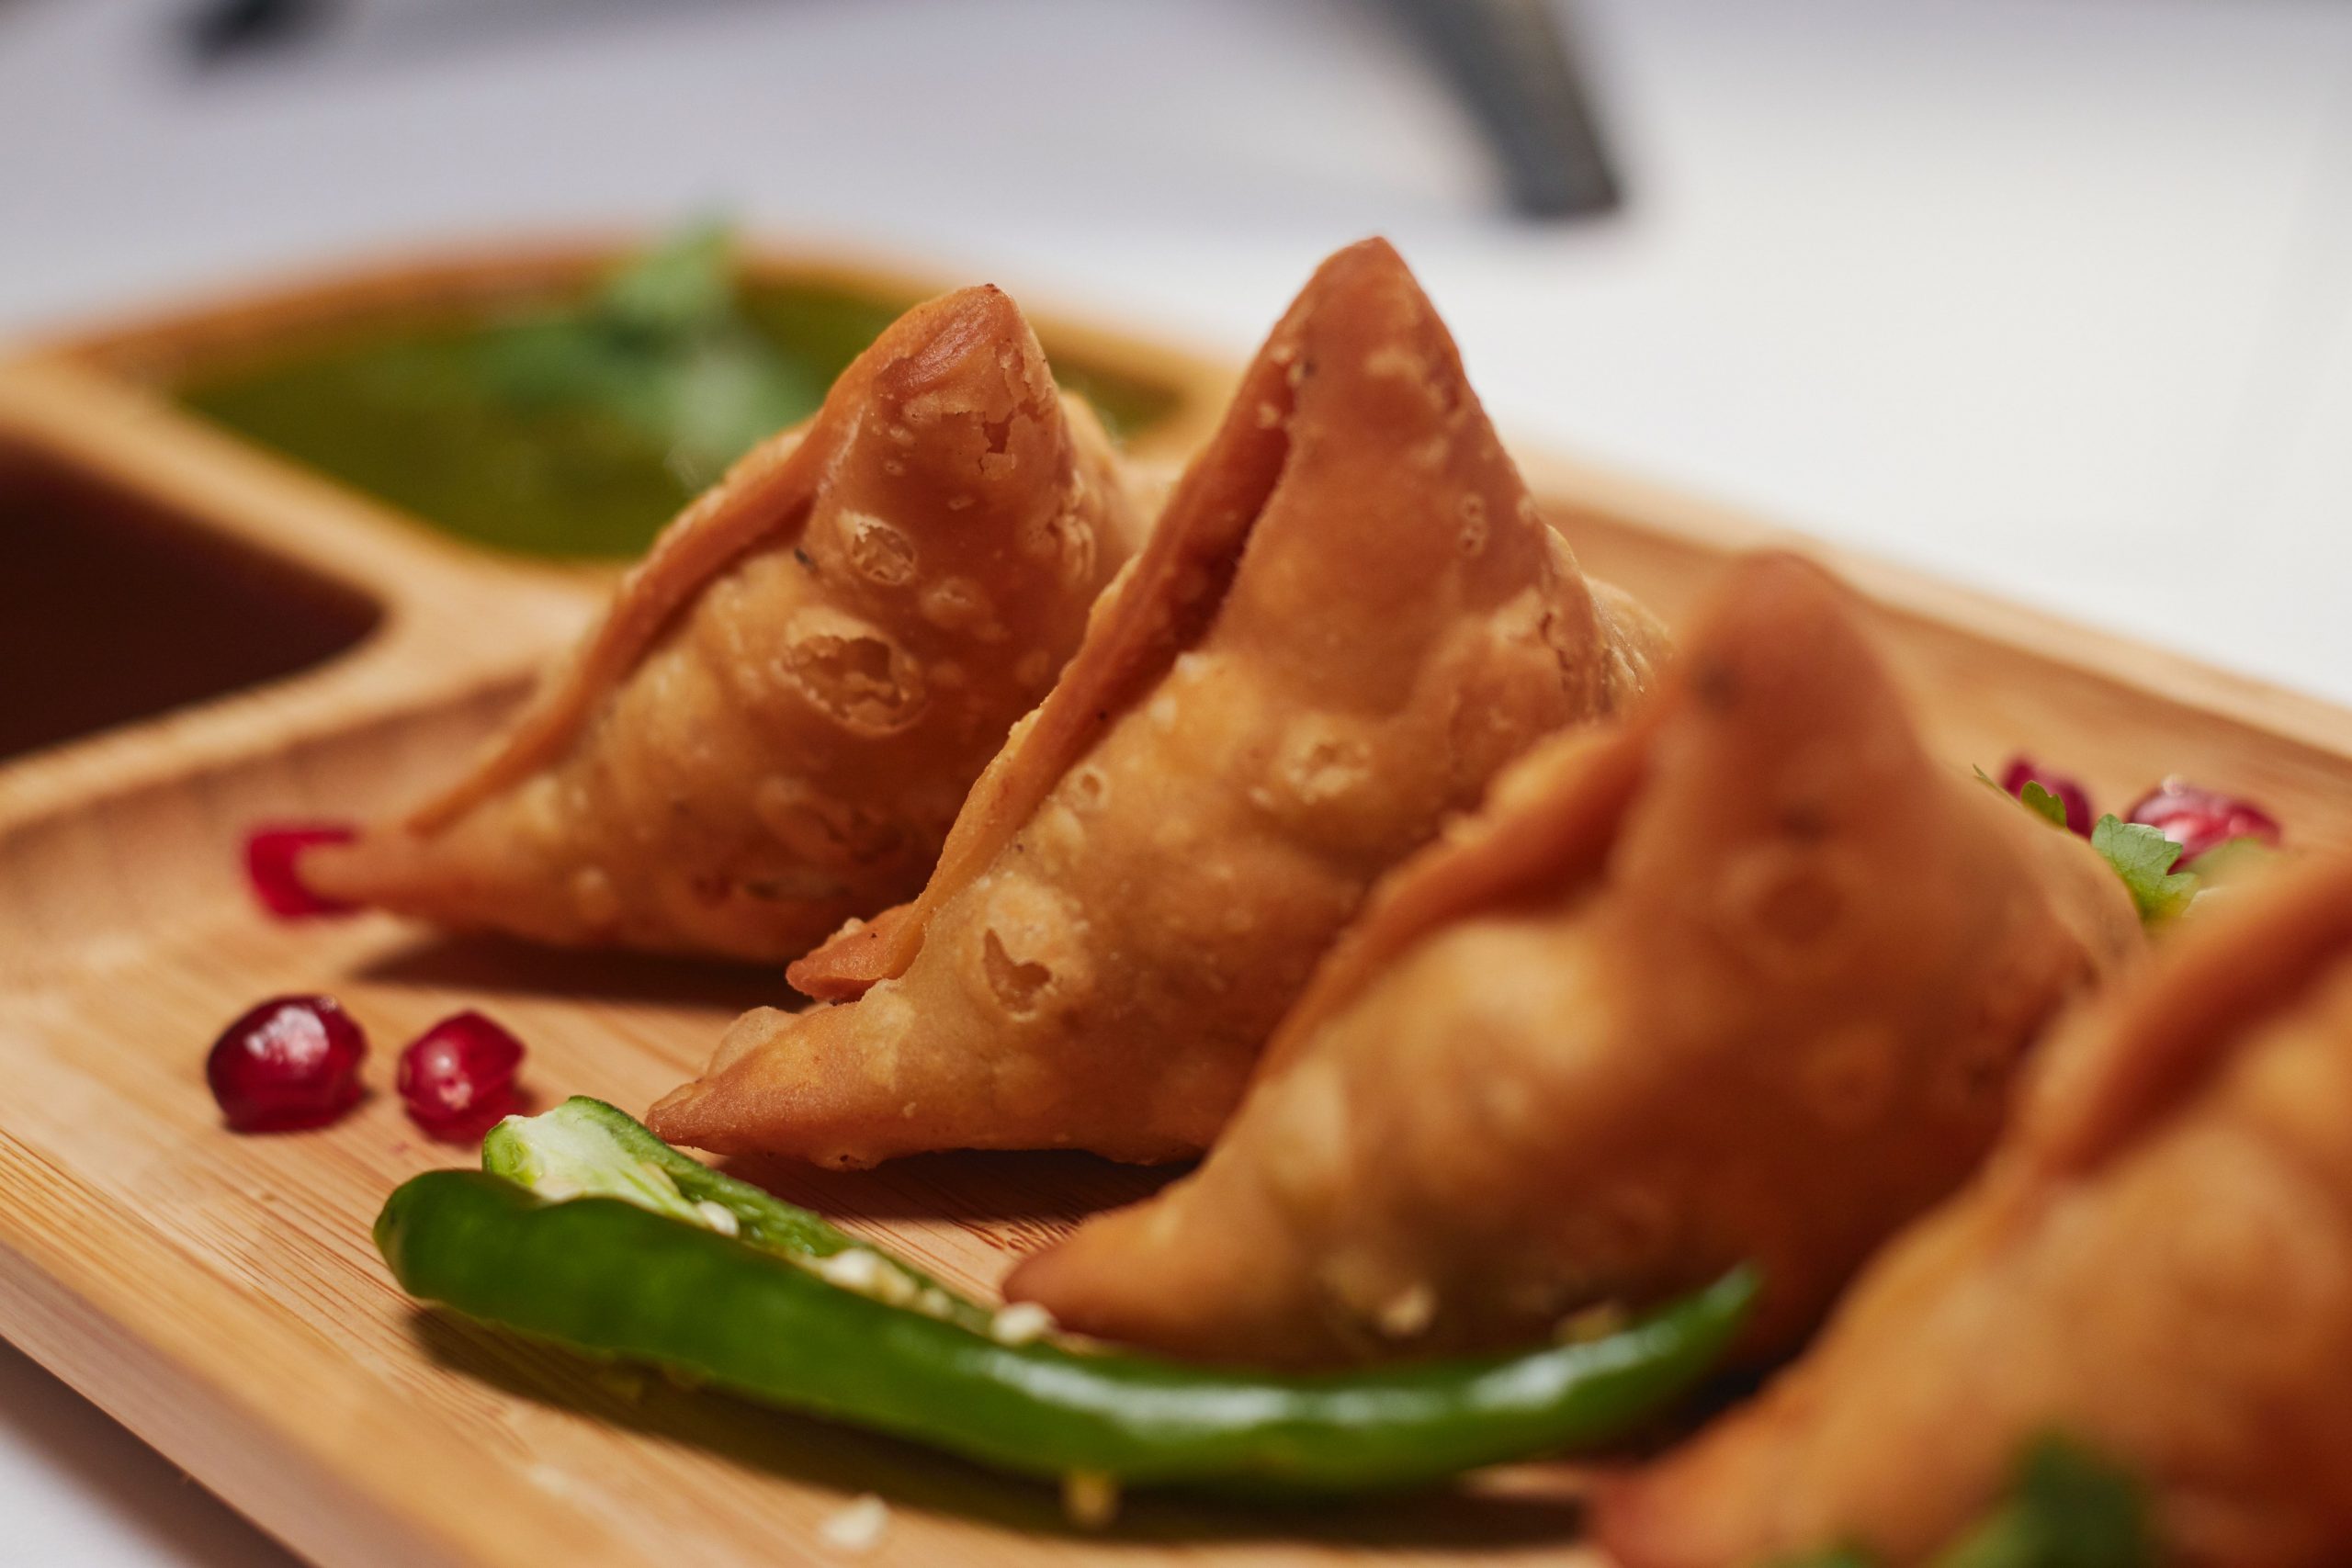 Watch: Italian man devours samosa for the first time, video goes viral